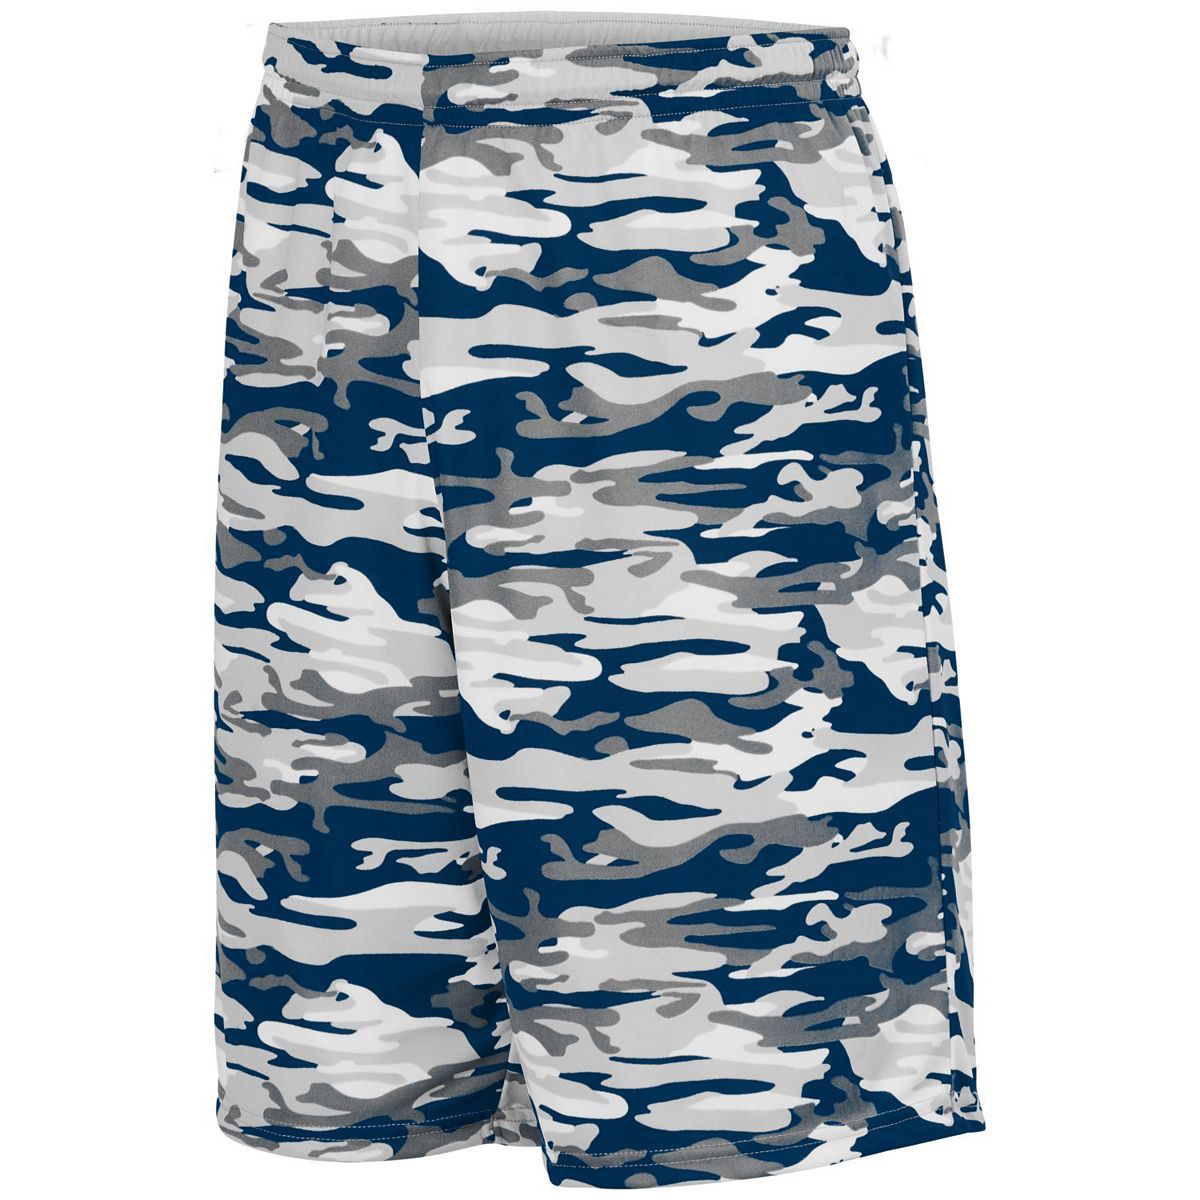 Augusta Sportswear Reversible Wicking Shorts in Navy Mod/White  -Part of the Adult, Adult-Shorts, Augusta-Products, Basketball, All-Sports, All-Sports-1 product lines at KanaleyCreations.com